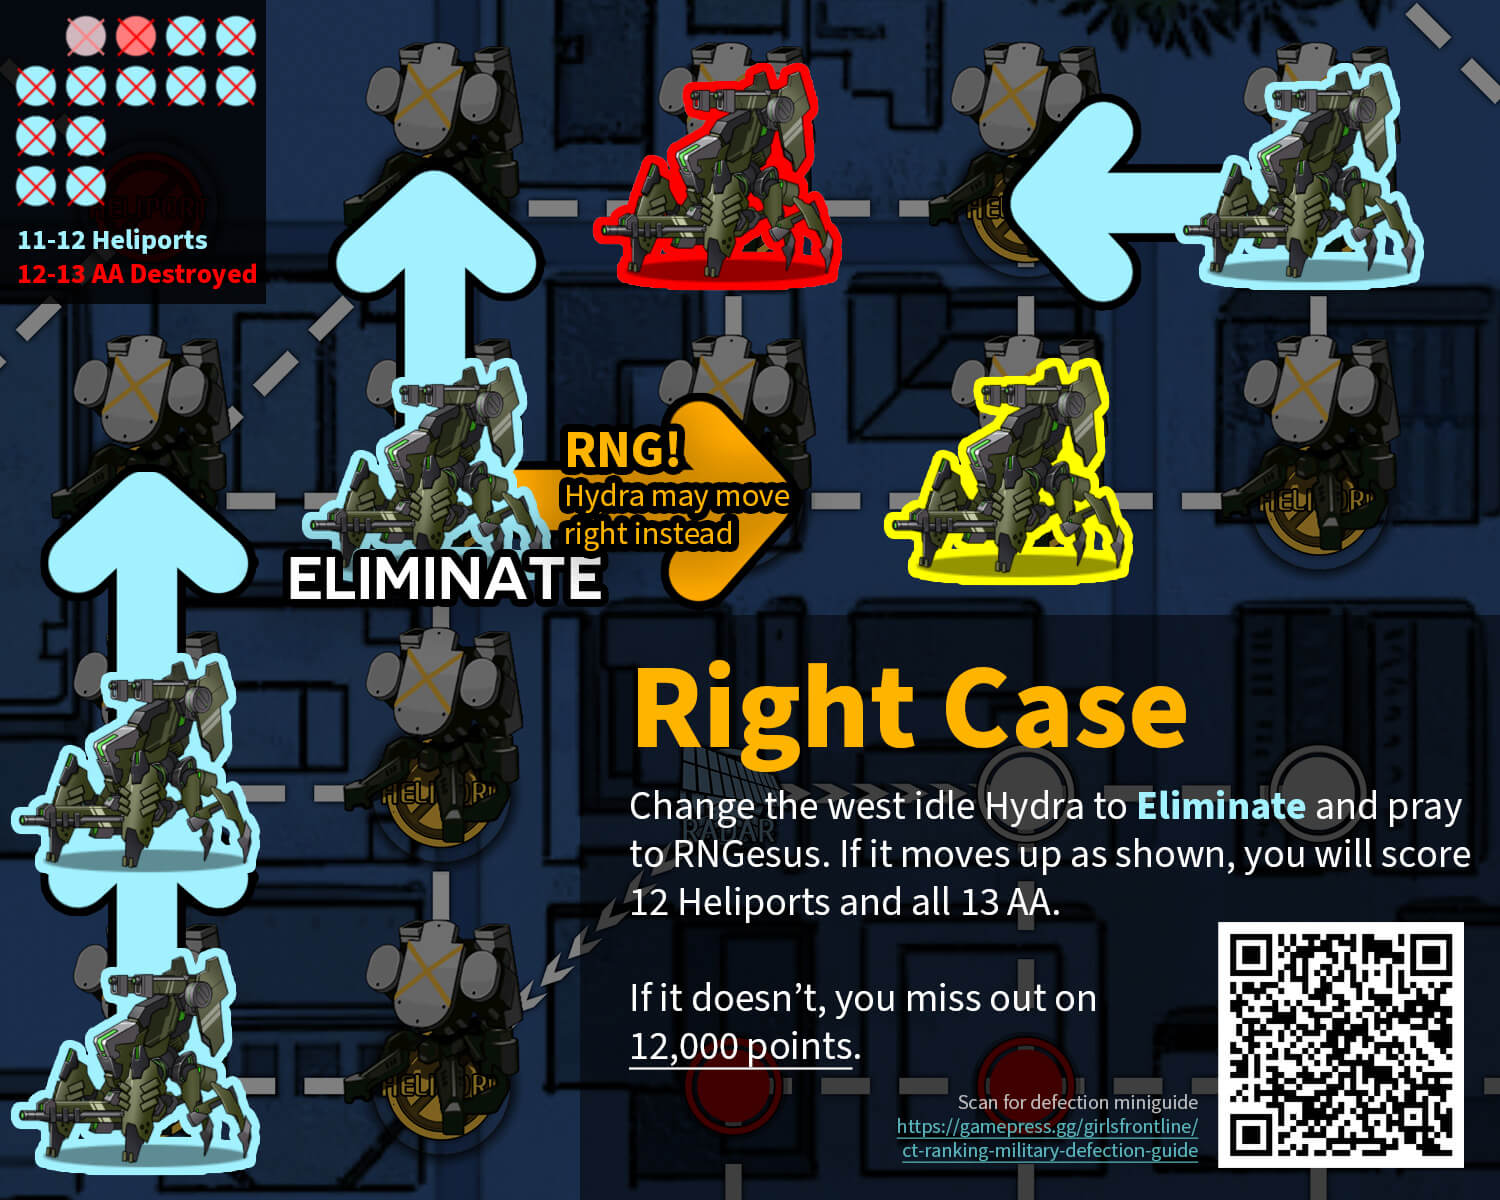 Inner Defection "All Standby" Turn 5 infographic covering the right case